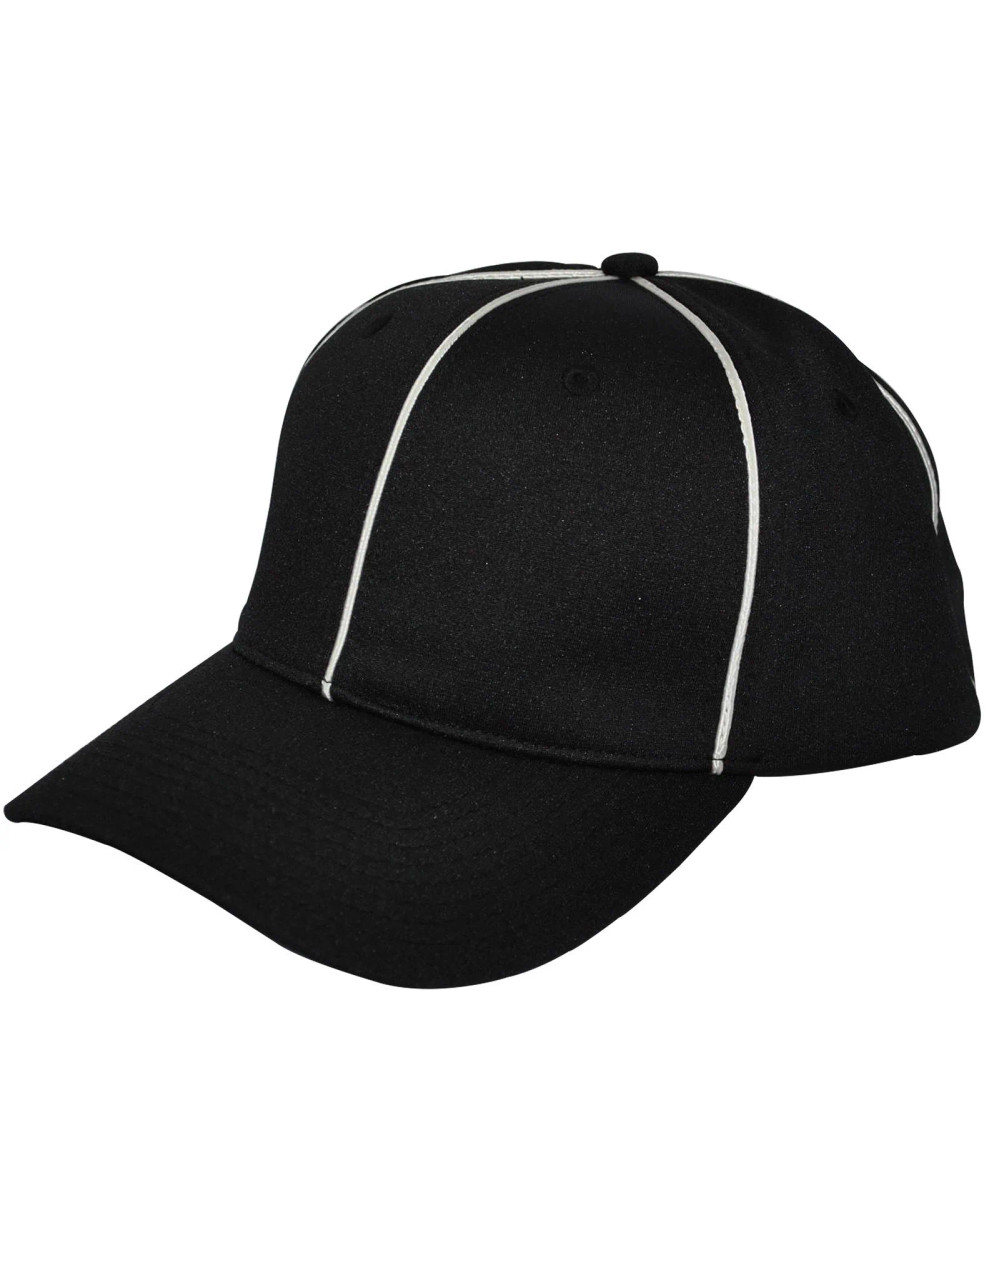 Smitty Black w/ White Piping Flex Fit Football Hat - Get Official Products